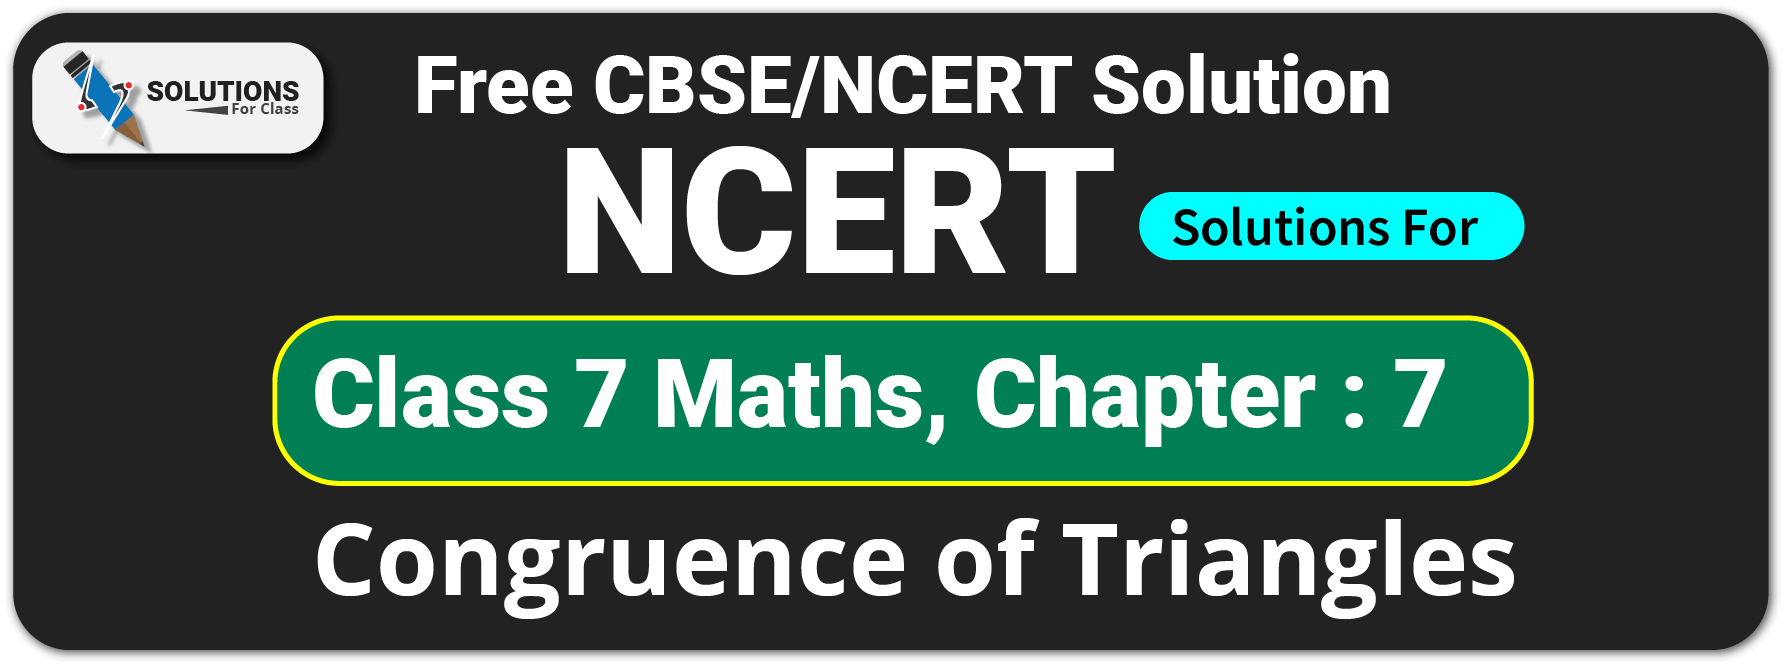 NCERT Solutions For Class 7 Maths Chapter 7, Congruence of Triangles